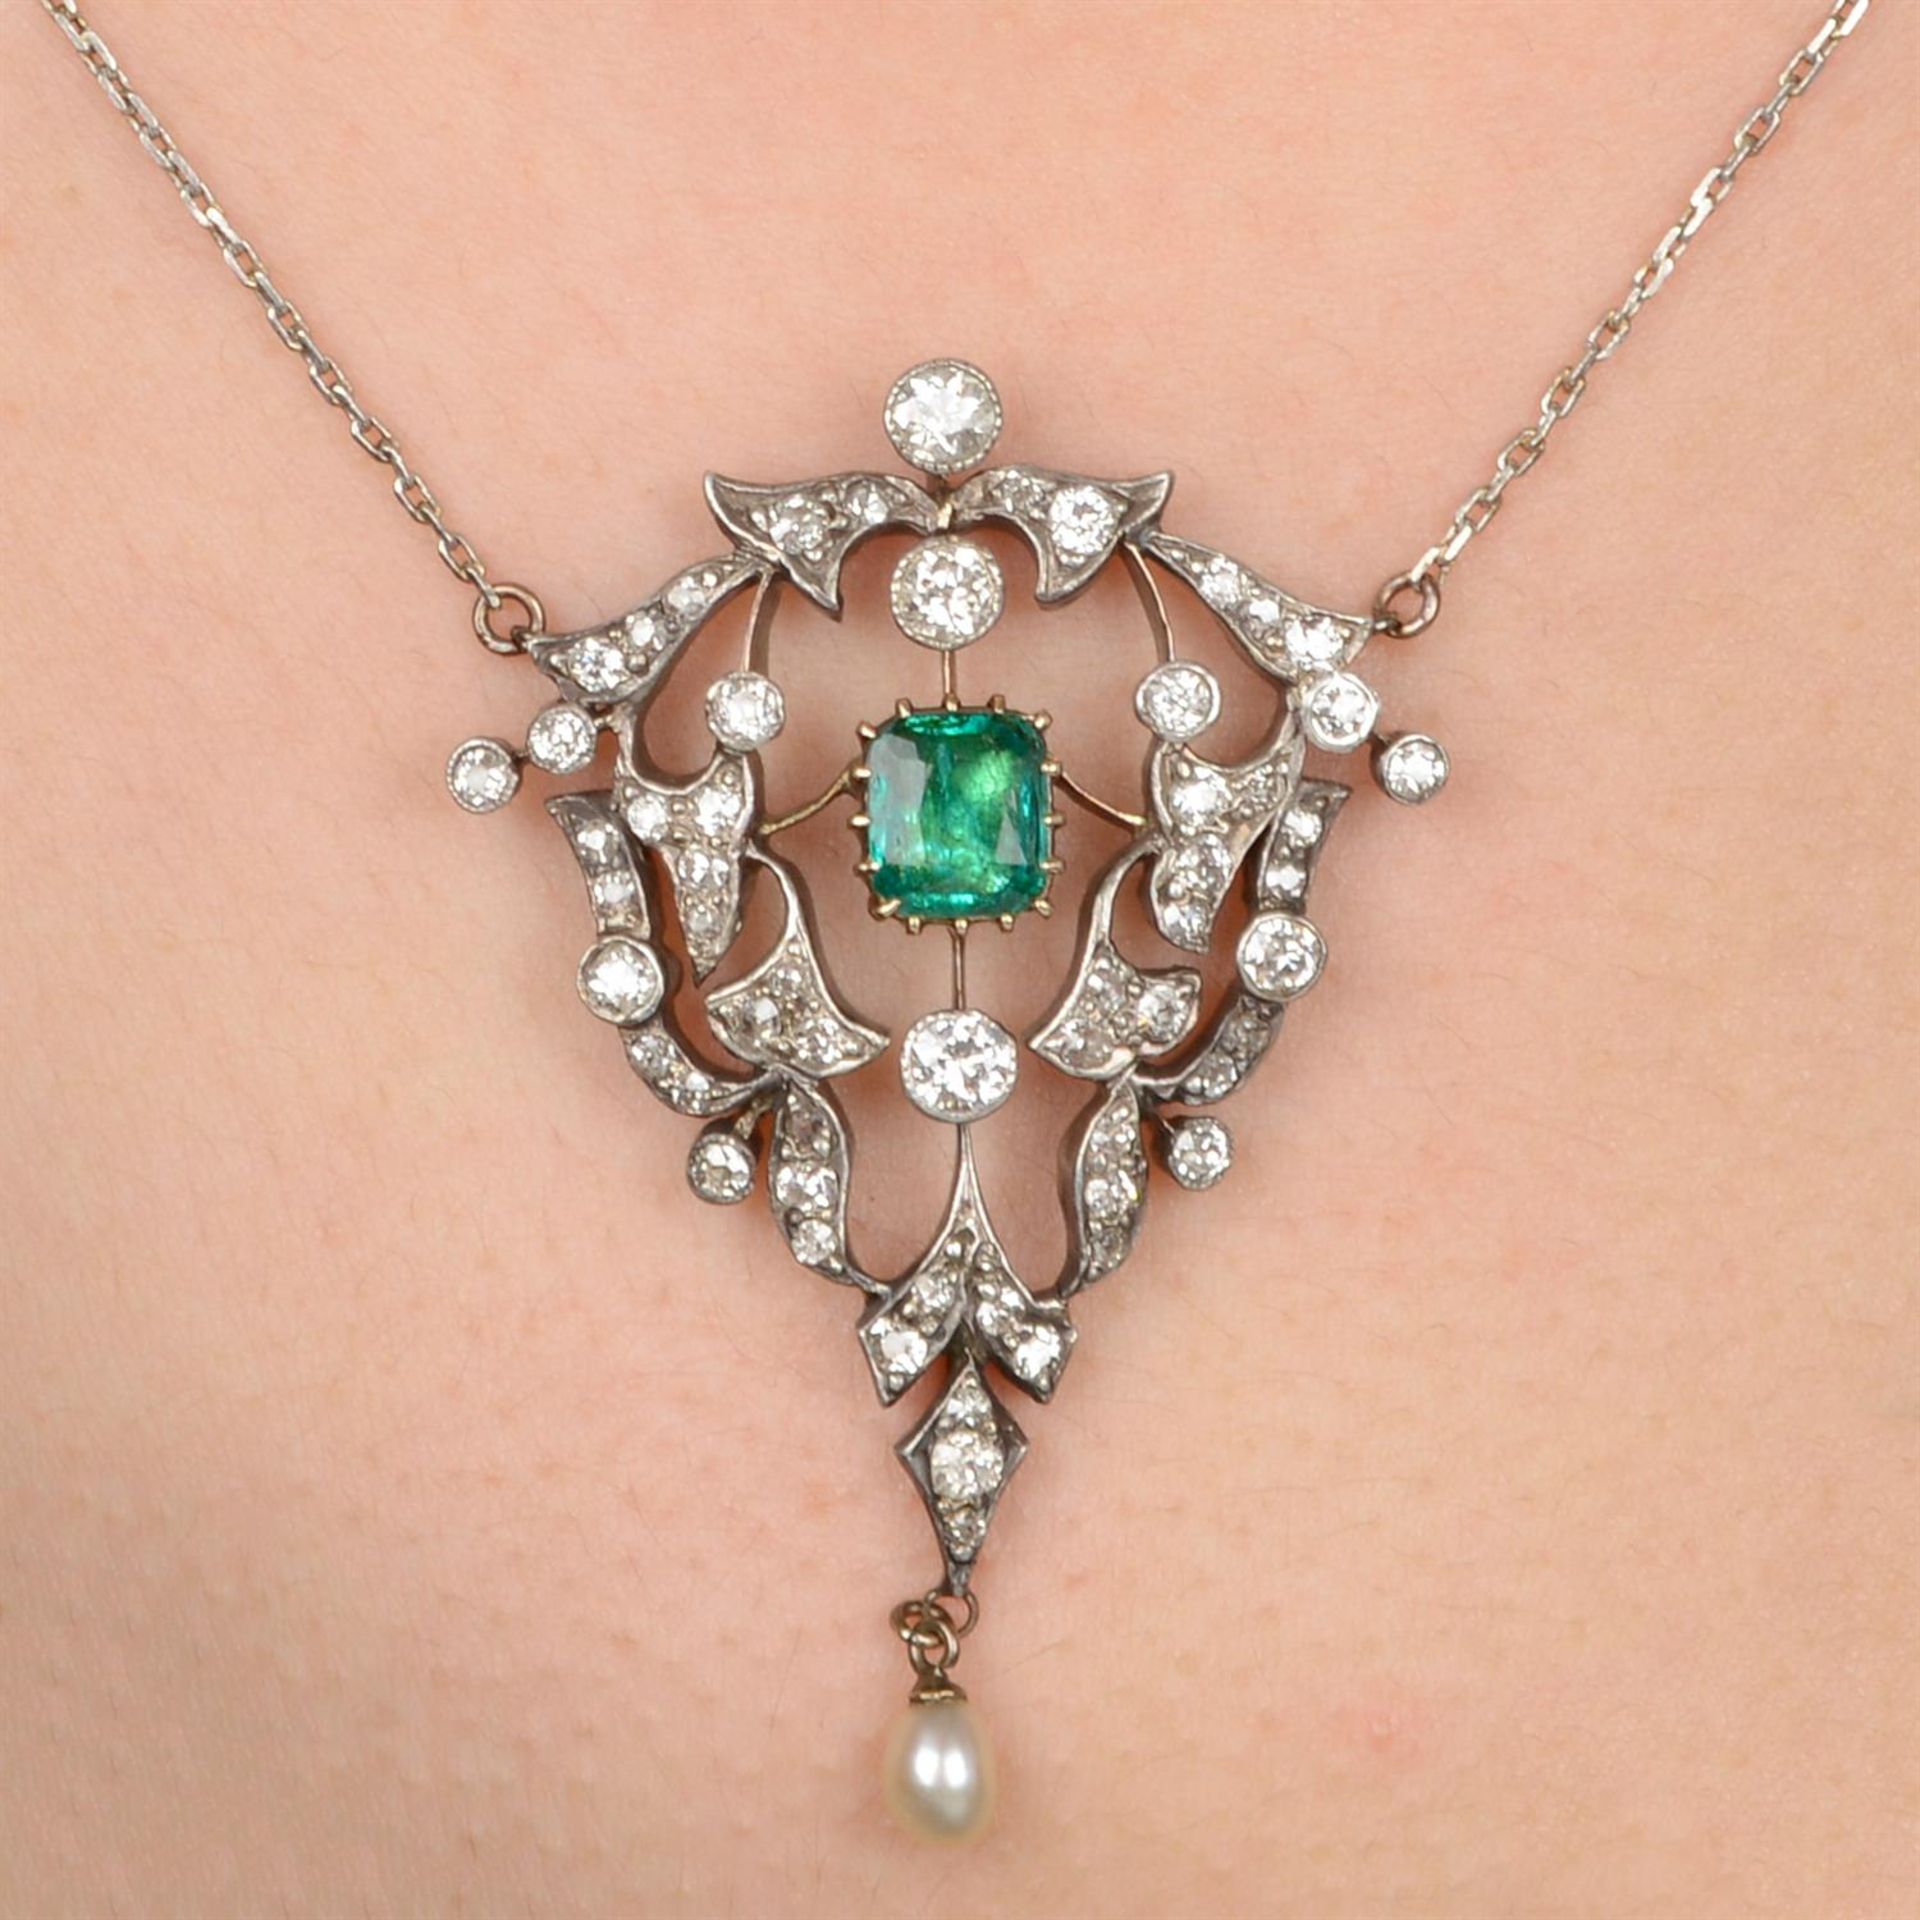 19th century emerald, diamond and pearl necklace